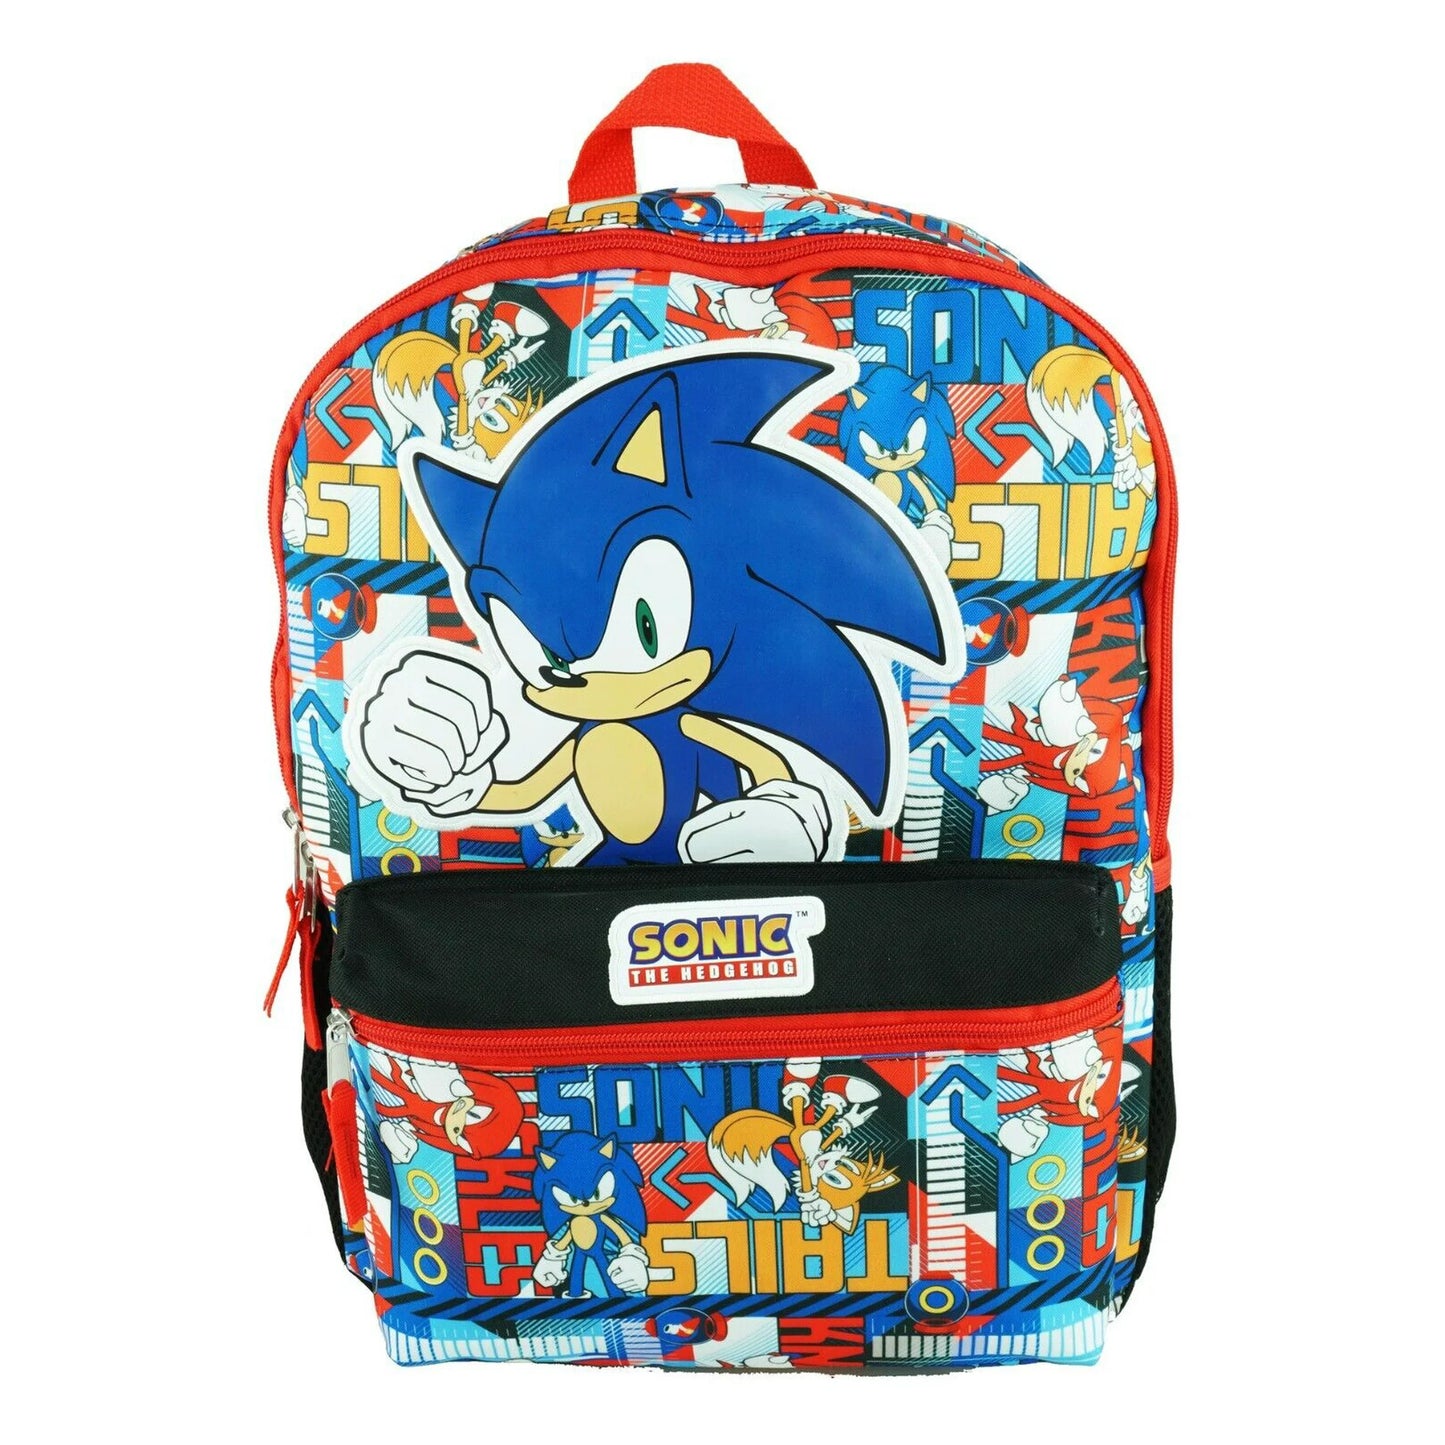 SEGA 16 inches Sonic the Hedgehog Allover Large Backpack